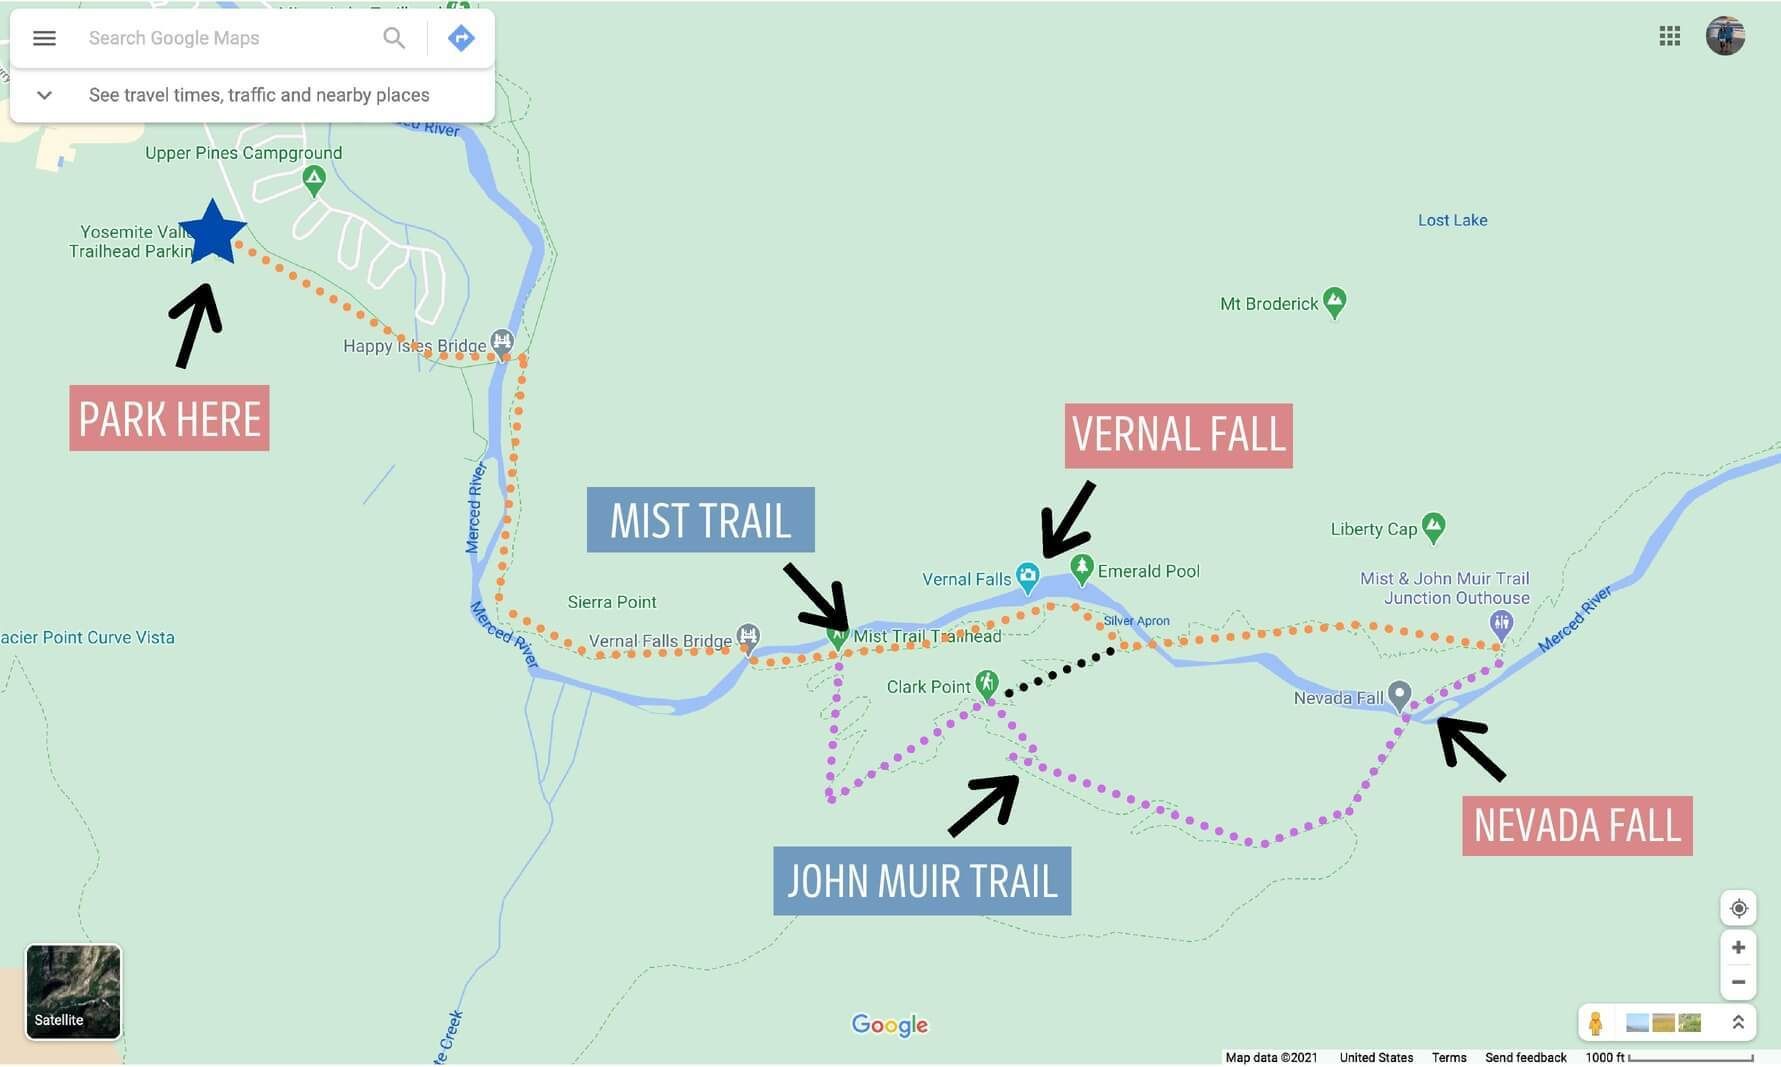 Yosemite Mist and john muir loop trail map showing directions passing vernal fall and nevada fall with parking